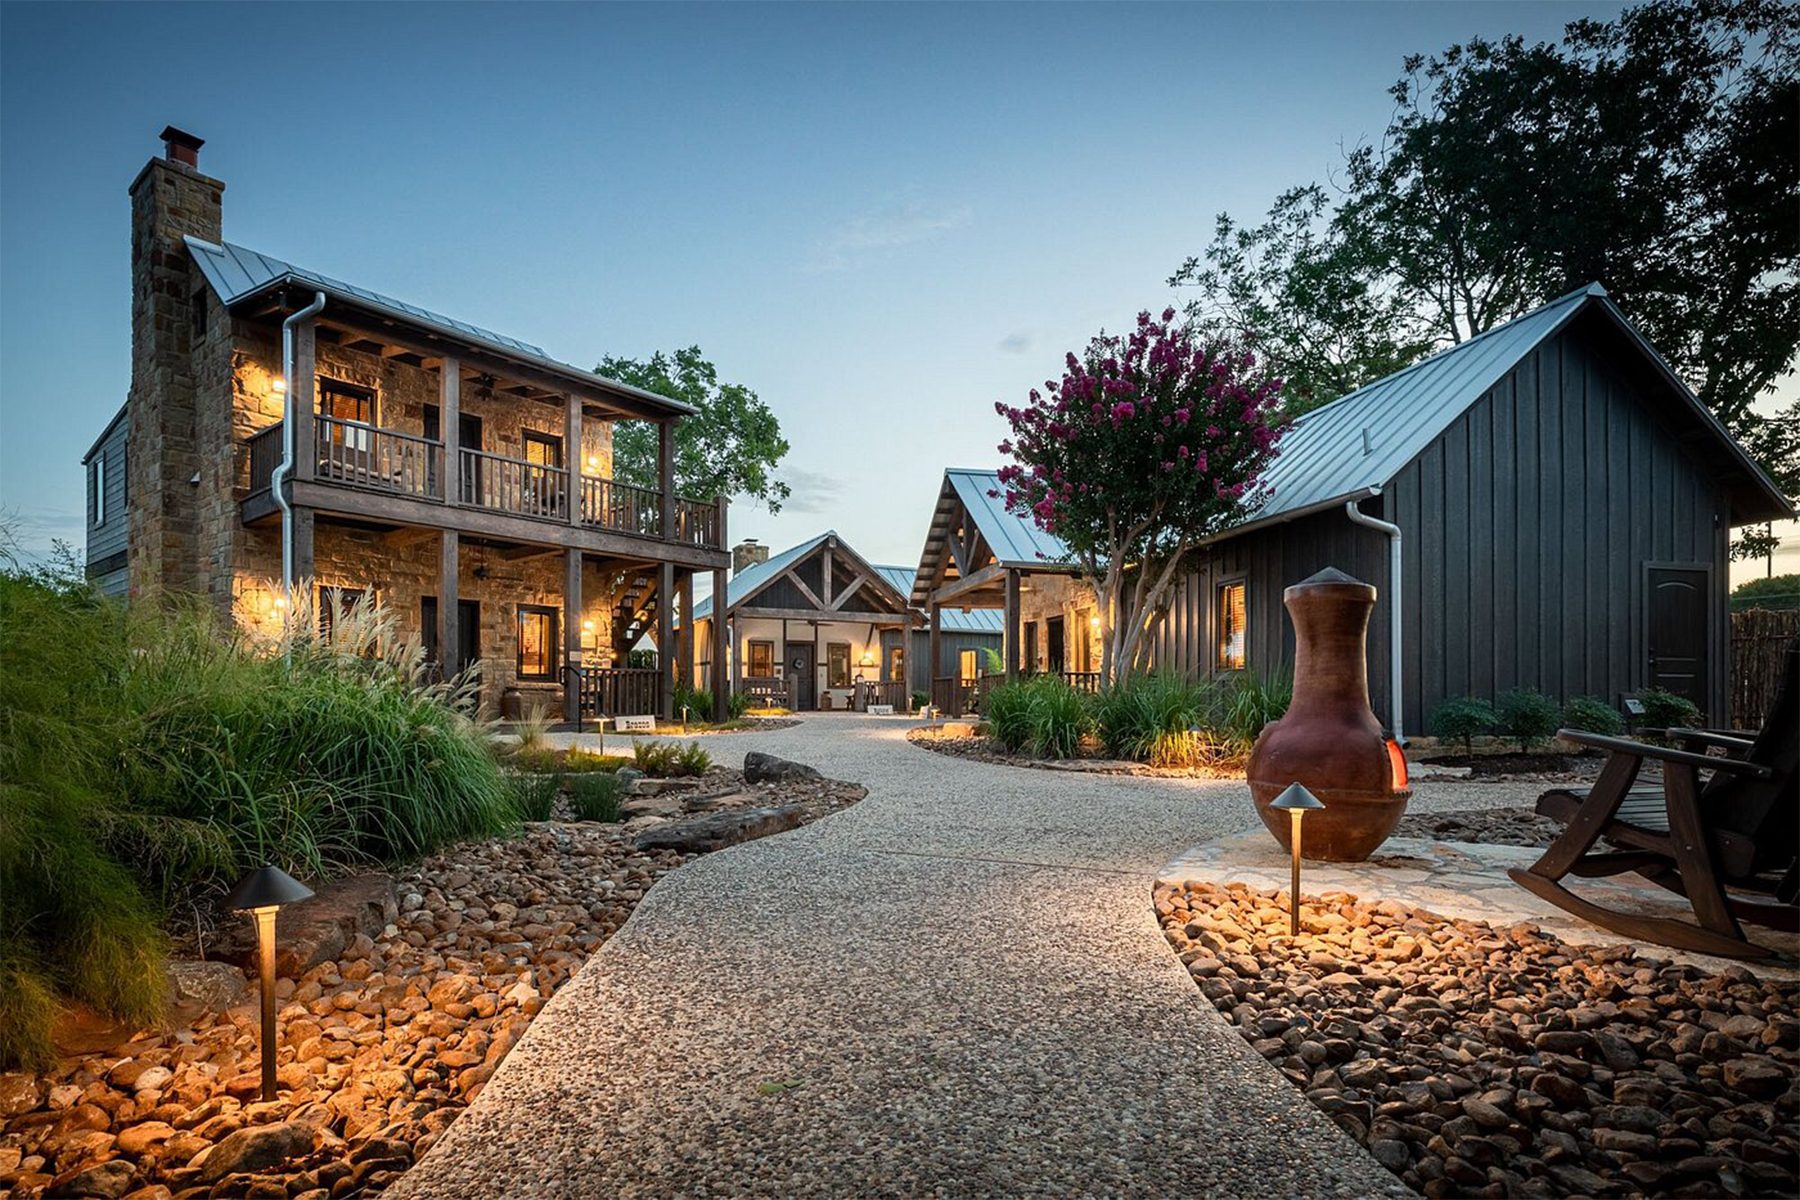 <h3 class="">Fredericksburg, Texas</h3> <p class=""><strong>Best for:</strong> A culinary adventure for couples in Texas Wine Country</p> <p>If you're looking for an adventure with a bit of Southern history, rustic cabins with modern amenities and what one guest described as a "Little House on the Prairie" stay, then <a href="https://www.tripadvisor.com/Hotel_Review-g55863-d543027-Reviews-Cotton_Gin_Village-Fredericksburg_Texas.html" rel="noopener">Cotton Gin Village</a> is the bed-and-breakfast for you. Located in <a href="https://www.rd.com/list/texas-road-trips/">historic Fredericksburg</a> in Texas Hill Country (and Texas wine country), the seven cabins on the property are like stepping back into pioneer days gone by, with original 1800s log structures that were handcrafted and relocated from Tennessee and Kentucky.</p> <p>Both the seven original log cabins and seven newly constructed cottages, built in the style of a Texas Hill Country German Fachwerk (or building), feature rustic furnishings and plush beds, wine chillers, Keurig makers, fireplaces, HD televisions and other upscale amenities. Outdoors, guests will find walking paths with ivy-covered walls, Koi ponds and waterfalls, and homey country-inspired decor like rocking chairs, chimineas and empty whiskey barrels.</p> <p>In the morning, a hot breakfast is delivered in a handmade Amish basket to both the cabins and cottages. There is also an on-site restaurant, Cabernet Grill, that serves Texas Hill Country cuisine paired with local wines. Guests who have stayed at the property love the peaceful accommodations, indulgent breakfasts and delightful dinners.</p> <p><strong>Pros:</strong></p> <ul> <li class="">A unique setting for a quiet adult getaway</li> <li class="">Highly acclaimed restaurant on the property</li> </ul> <p><strong>Cons:</strong></p> <ul> <li class="">Only service dogs are allowed</li> <li class="">Located 2.5 miles from Main Street, so you'll need a car to head into town</li> </ul> <p class="listicle-page__cta-button-shop"><a class="shop-btn" href="https://www.tripadvisor.com/Hotel_Review-g55863-d543027-Reviews-Cotton_Gin_Village-Fredericksburg_Texas.html">Book Now</a></p>